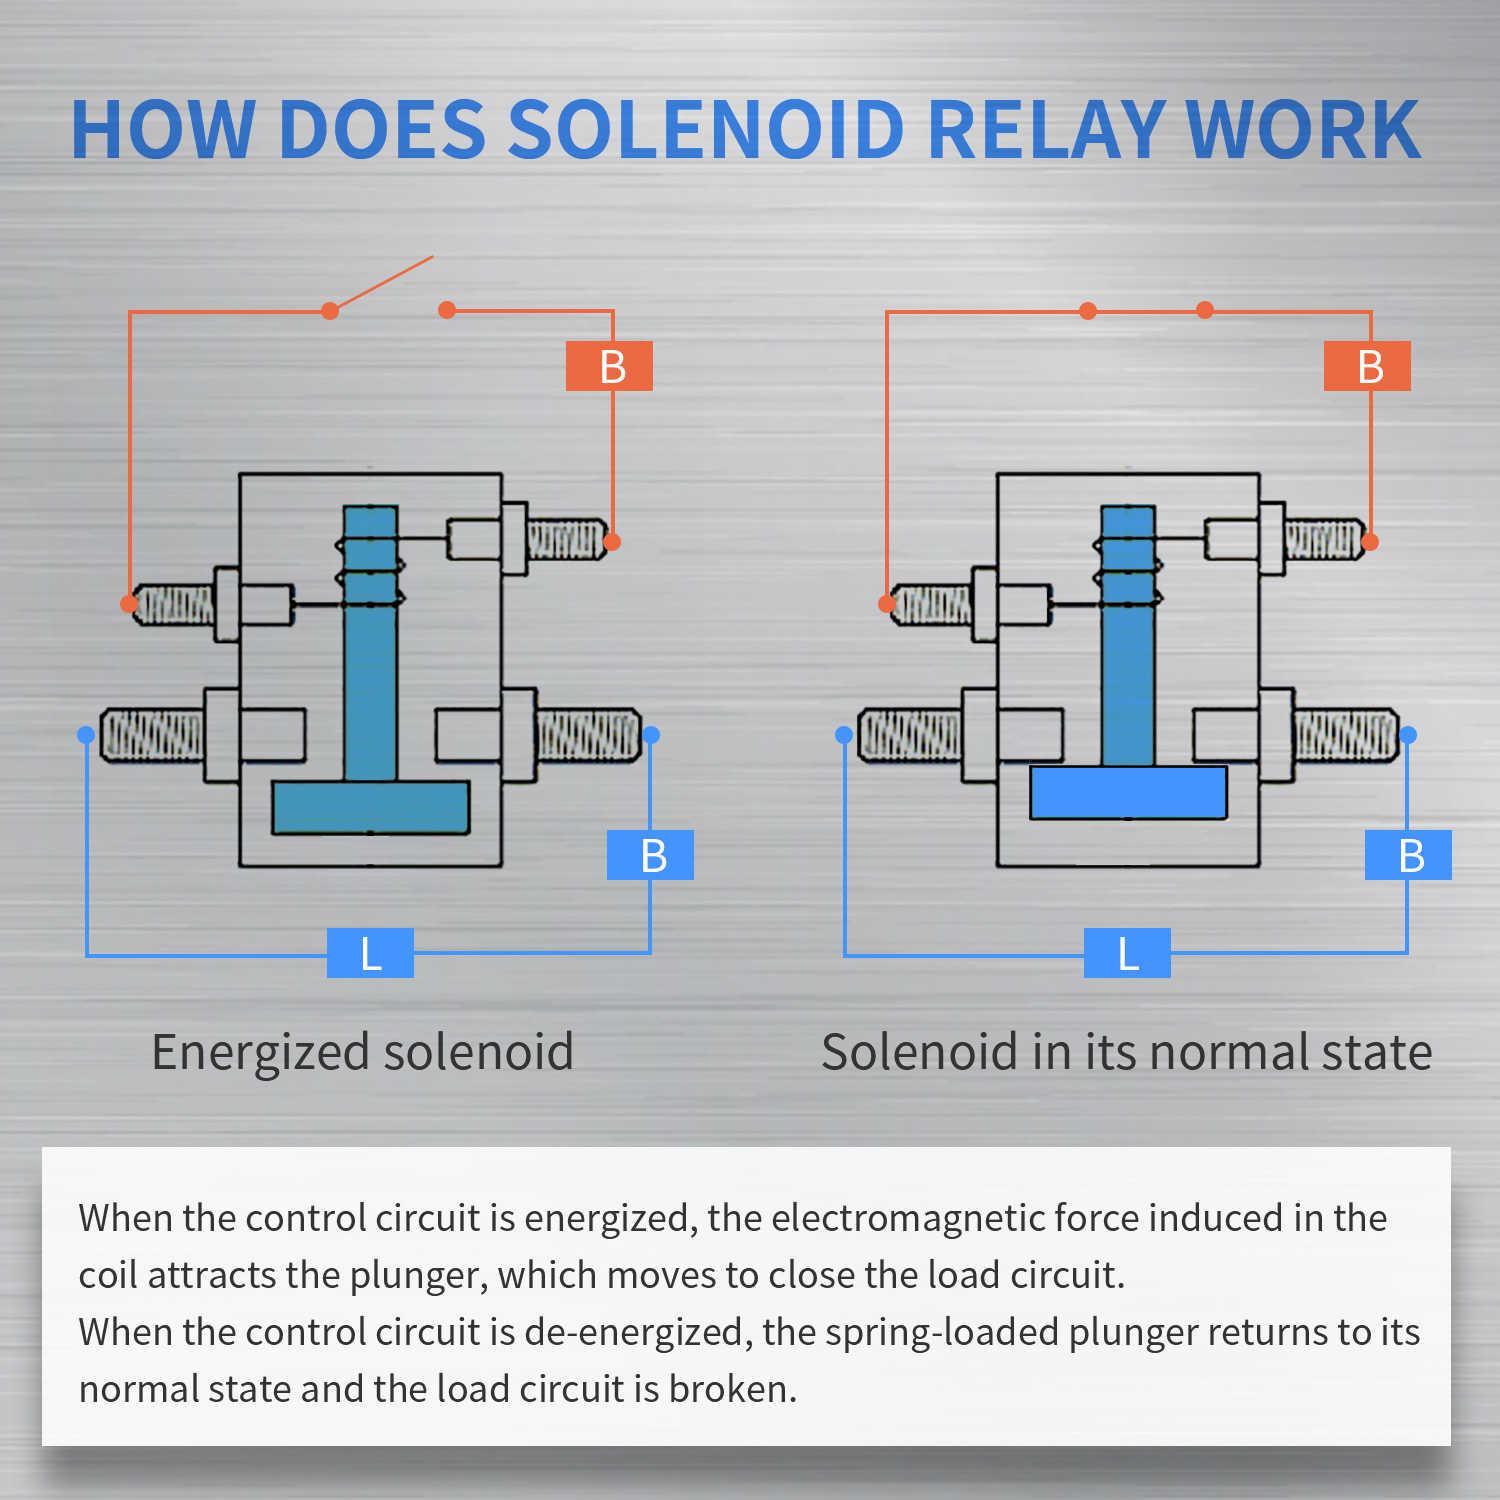 How Does a Solenoid Work?